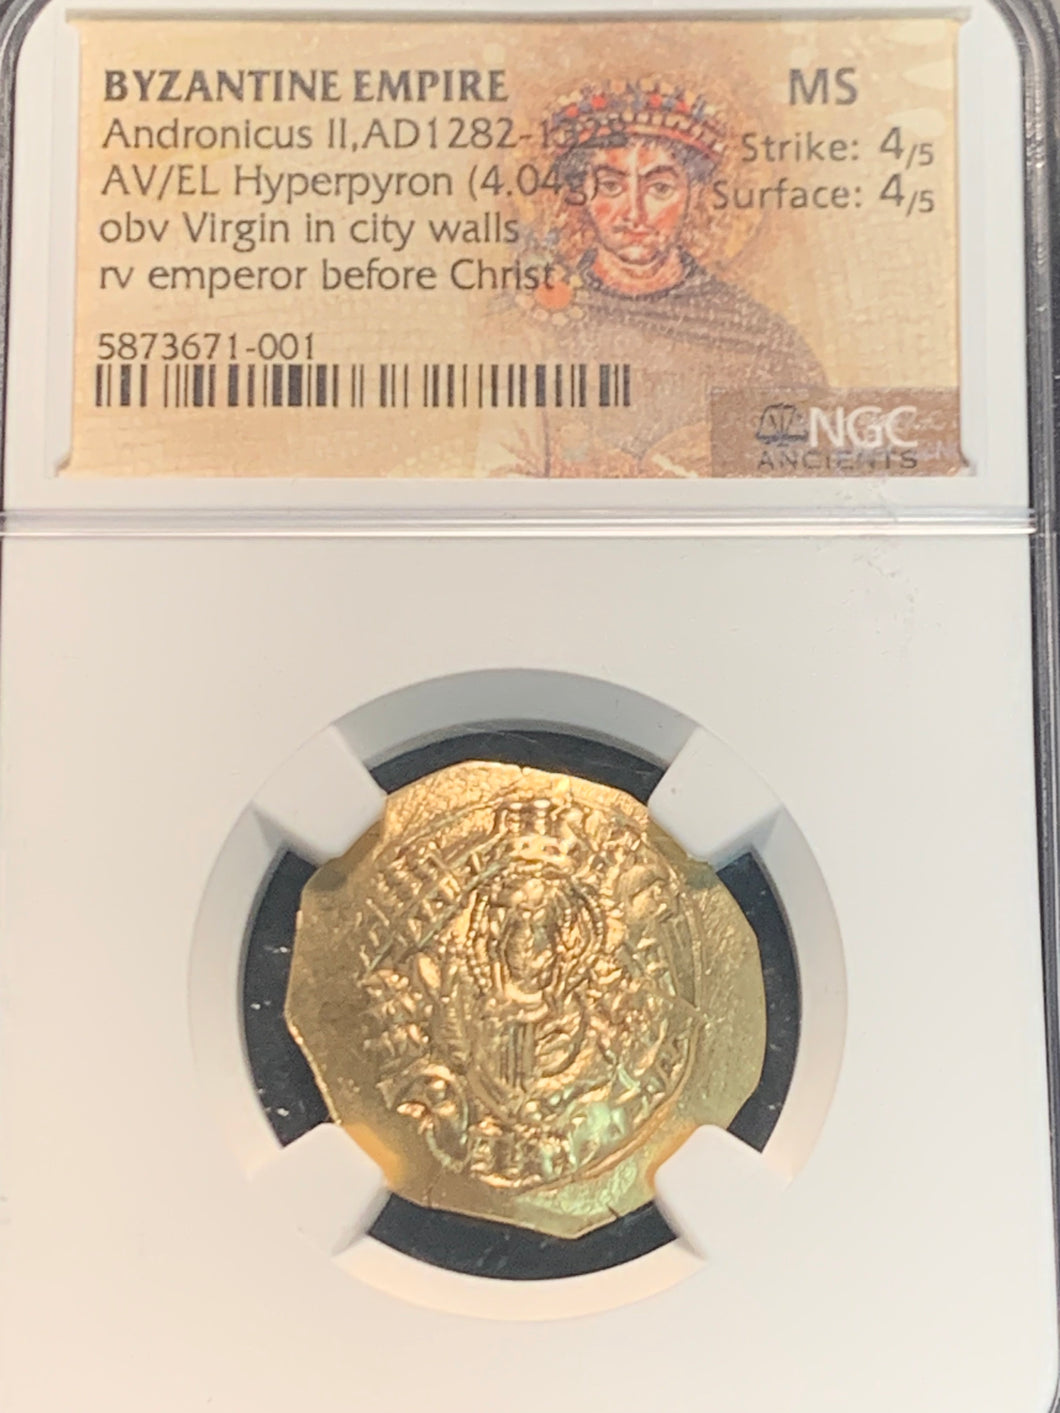 Byzantine Empire, 1282-1328 AD, Andronicus II, Gold Hyperpyron, 4.04g, NGC authenticated. Strike 4/5, Surface 4/5